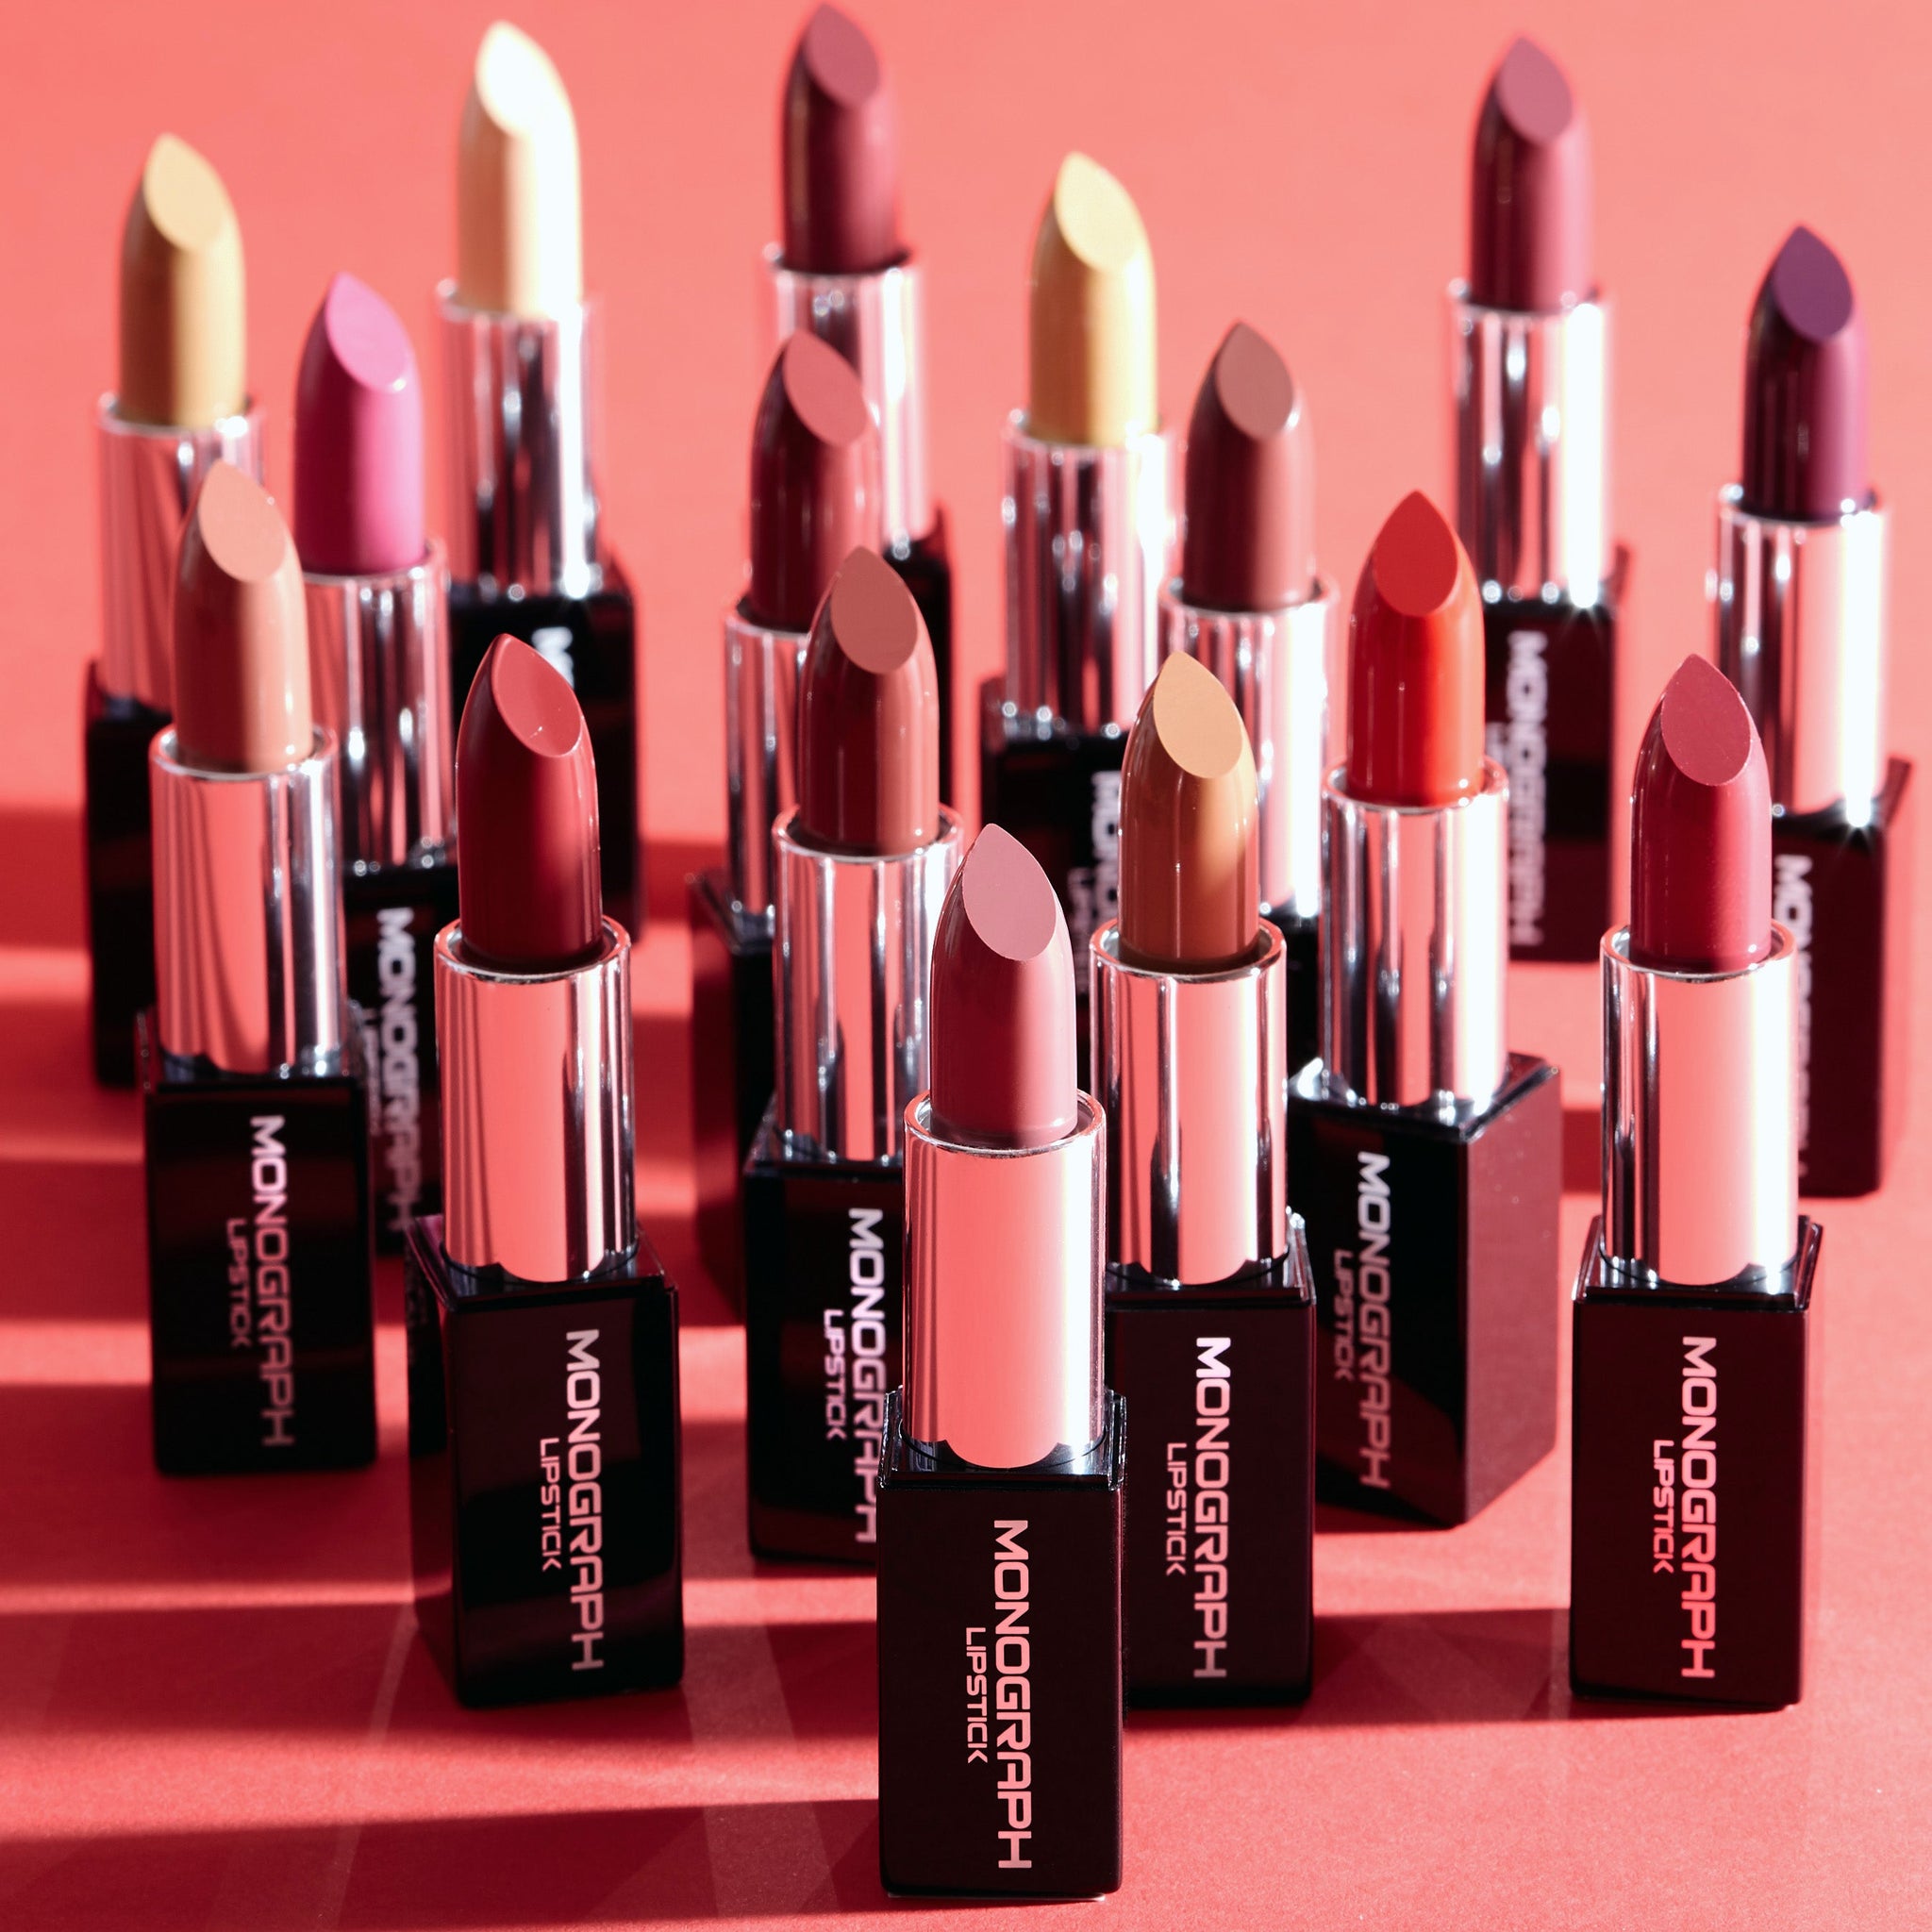 monograph cream lipsticks in grouping with bullets exposed